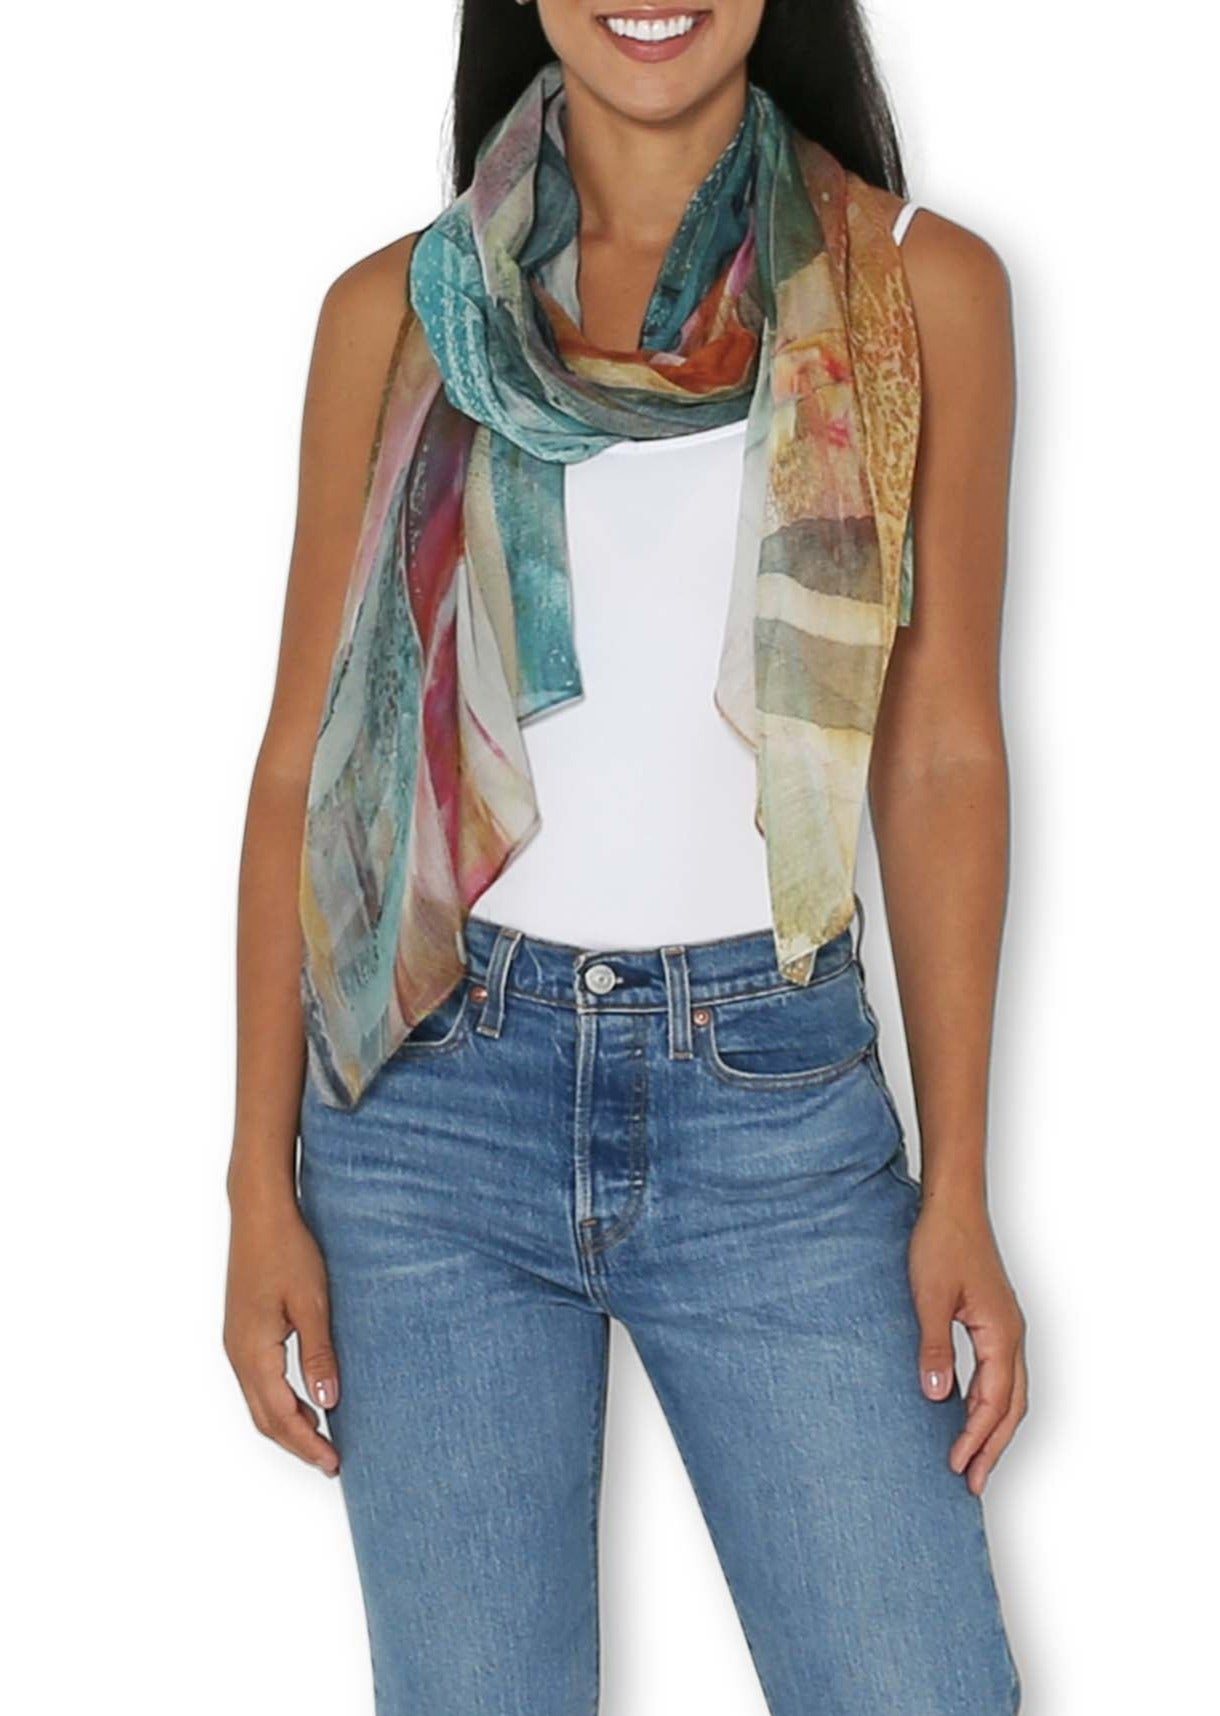 The Artists Label Bamboo Scarf